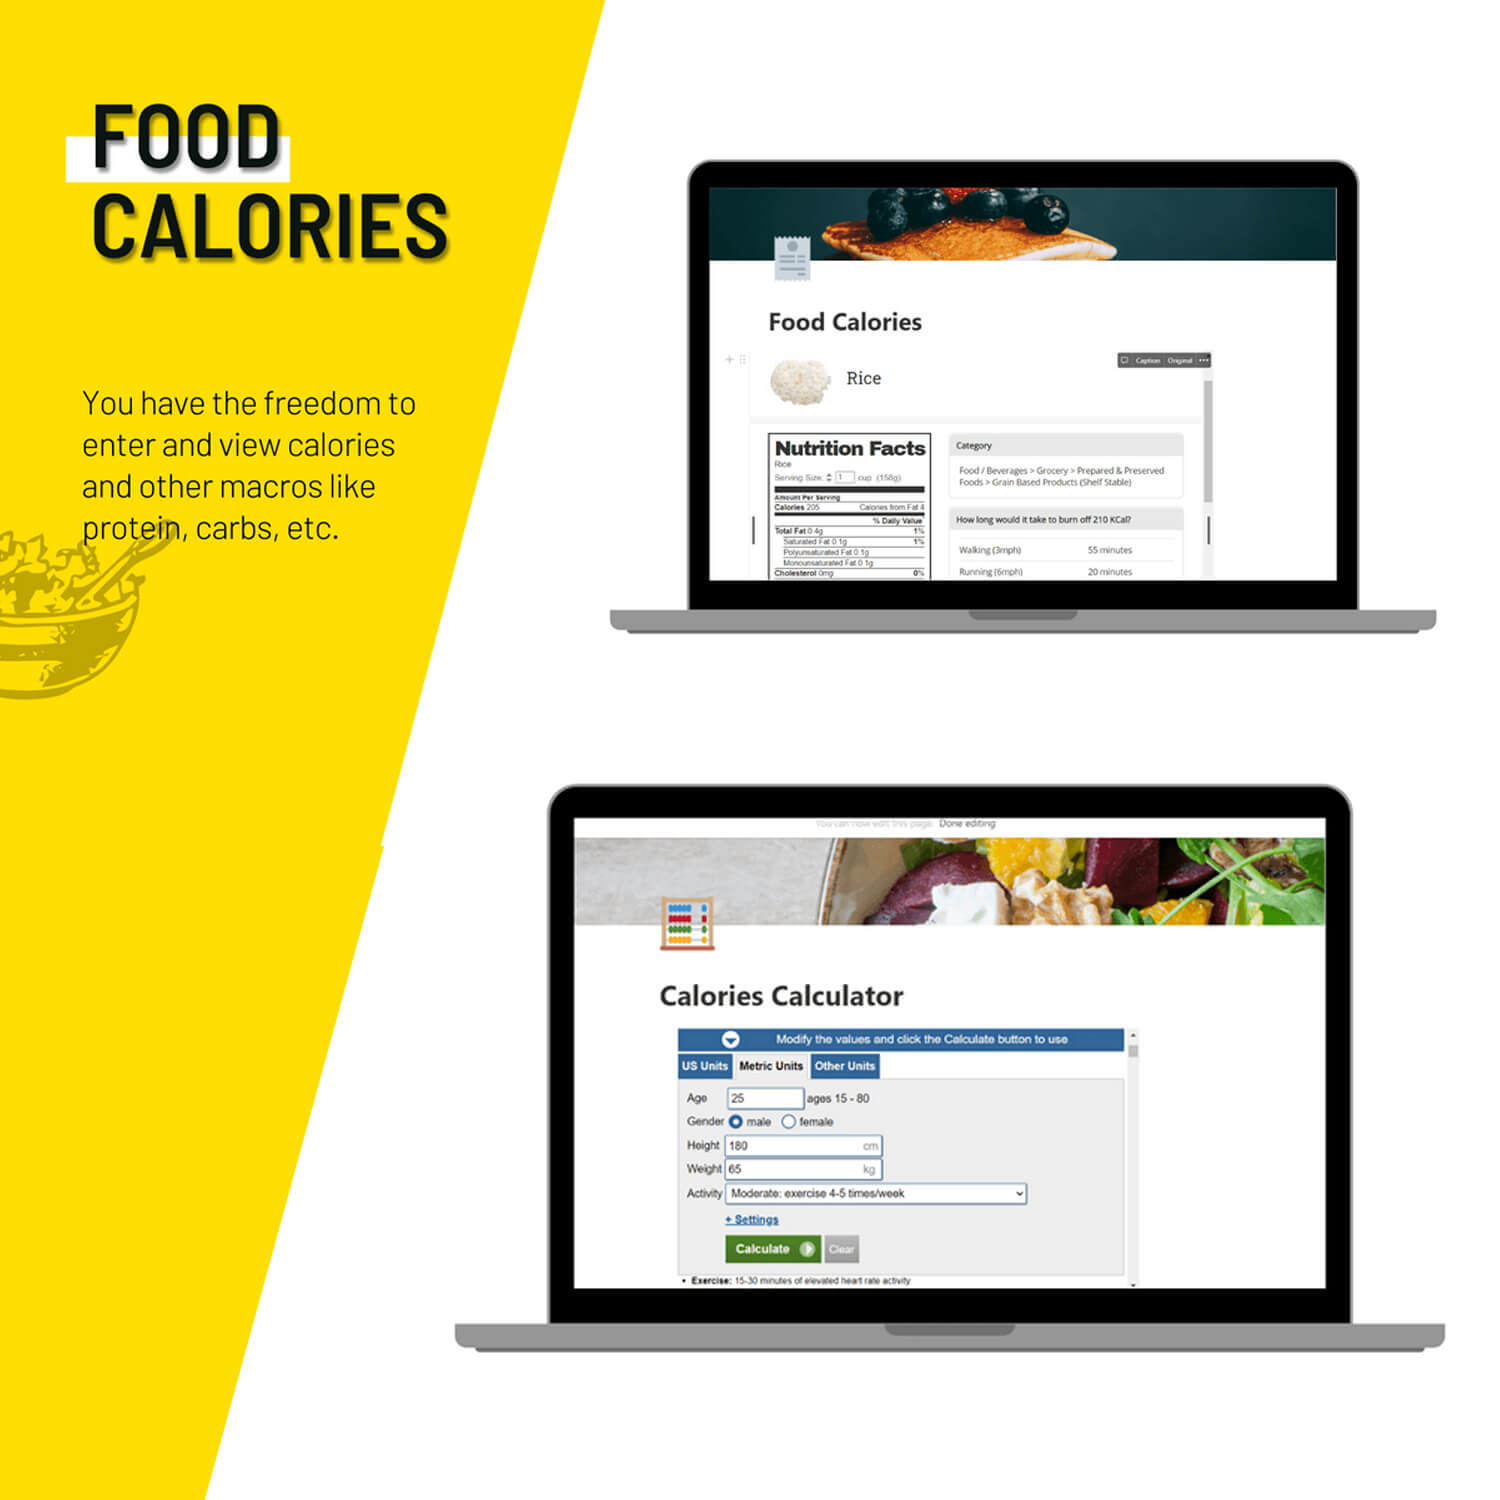 Inscription: Food Calories, You have the freedom to enter and view calories and other macros like protein, carbs, etc.